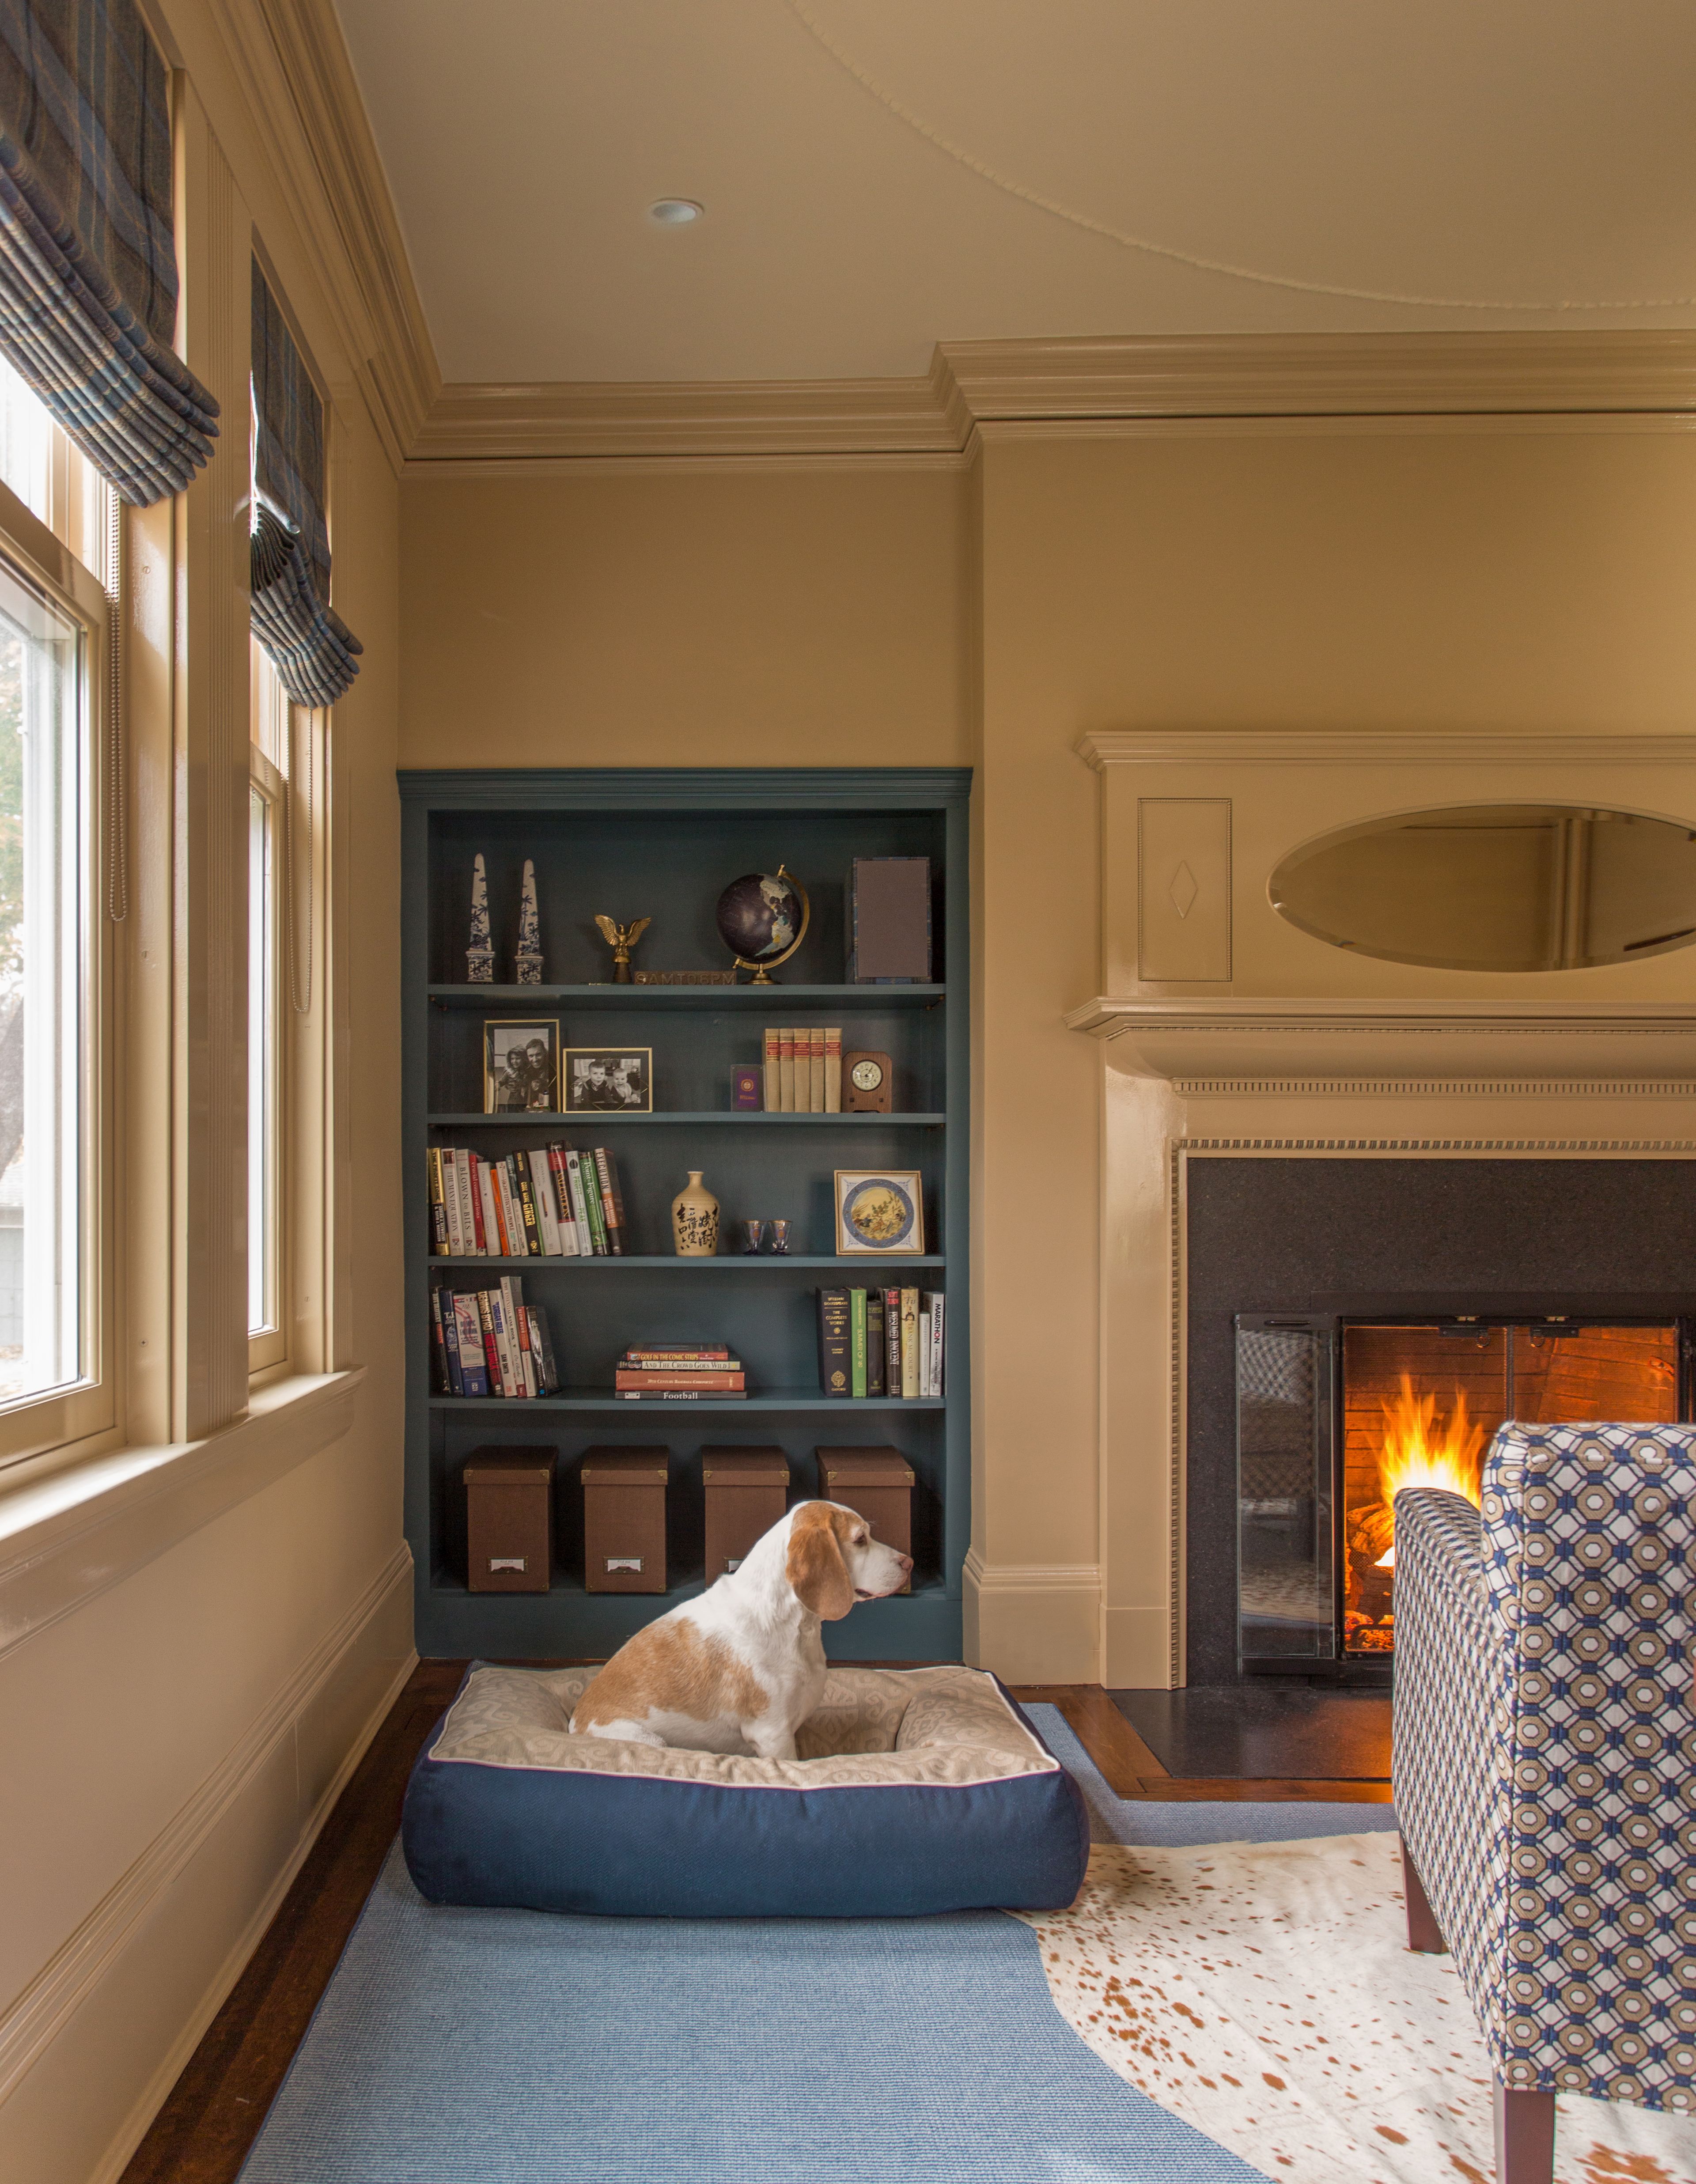 One Room Challenge: Manbrary Reveal | Kelly Rogers Interiors | Interiors for Families